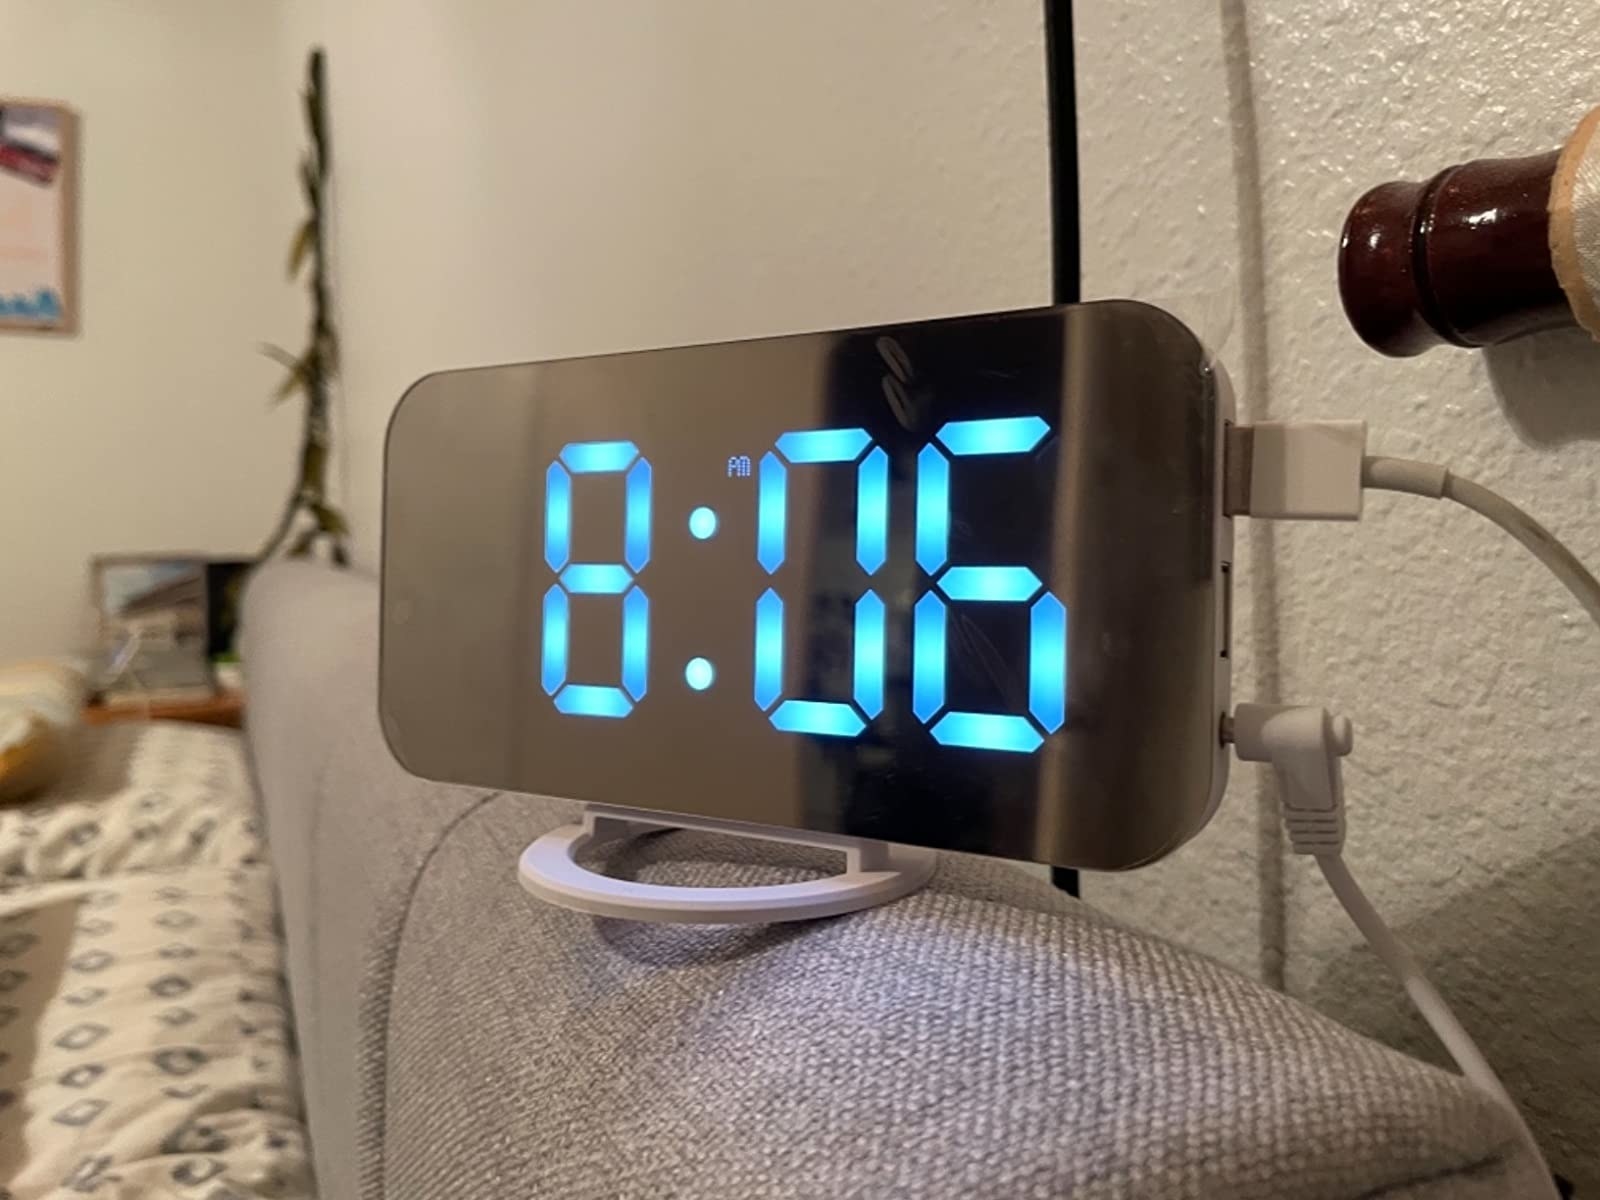 Reviewer photo of the digital clock on top of a couch, with blue LED lit numbers